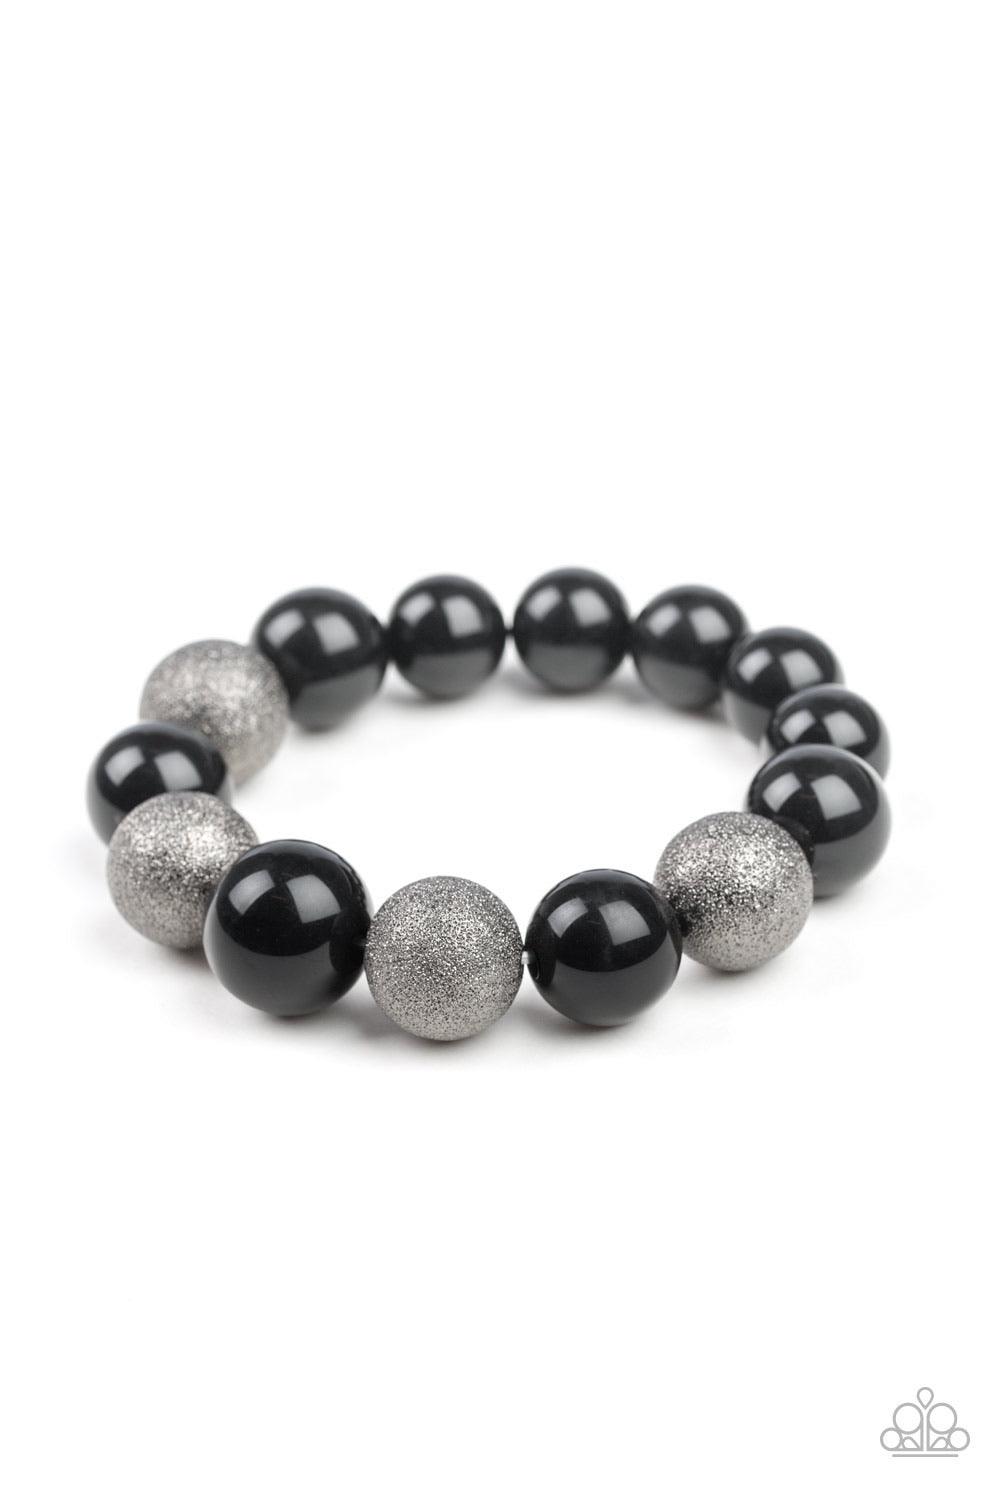 Paparazzi Accessories Humble Hustle - Black Dusted in glitter, sparkling gunmetal and shiny black beads are threaded along a stretchy band around the wrist for a glamorous look. Sold as one individual bracelet. Jewelry